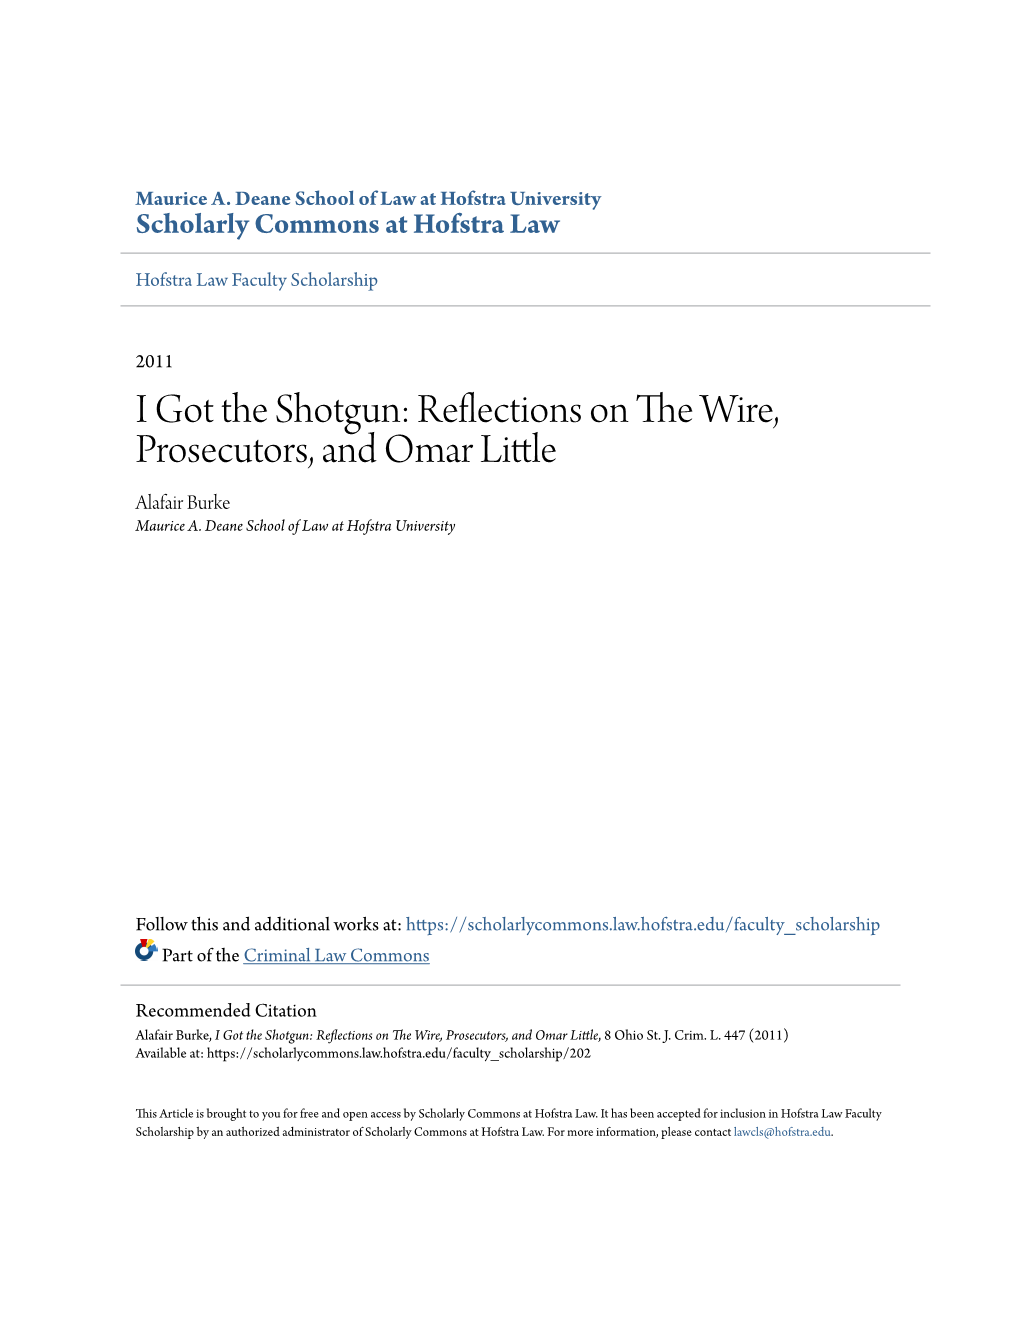 Reflections on the Wire, Prosecutors, and Omar Little, 8 Ohio St